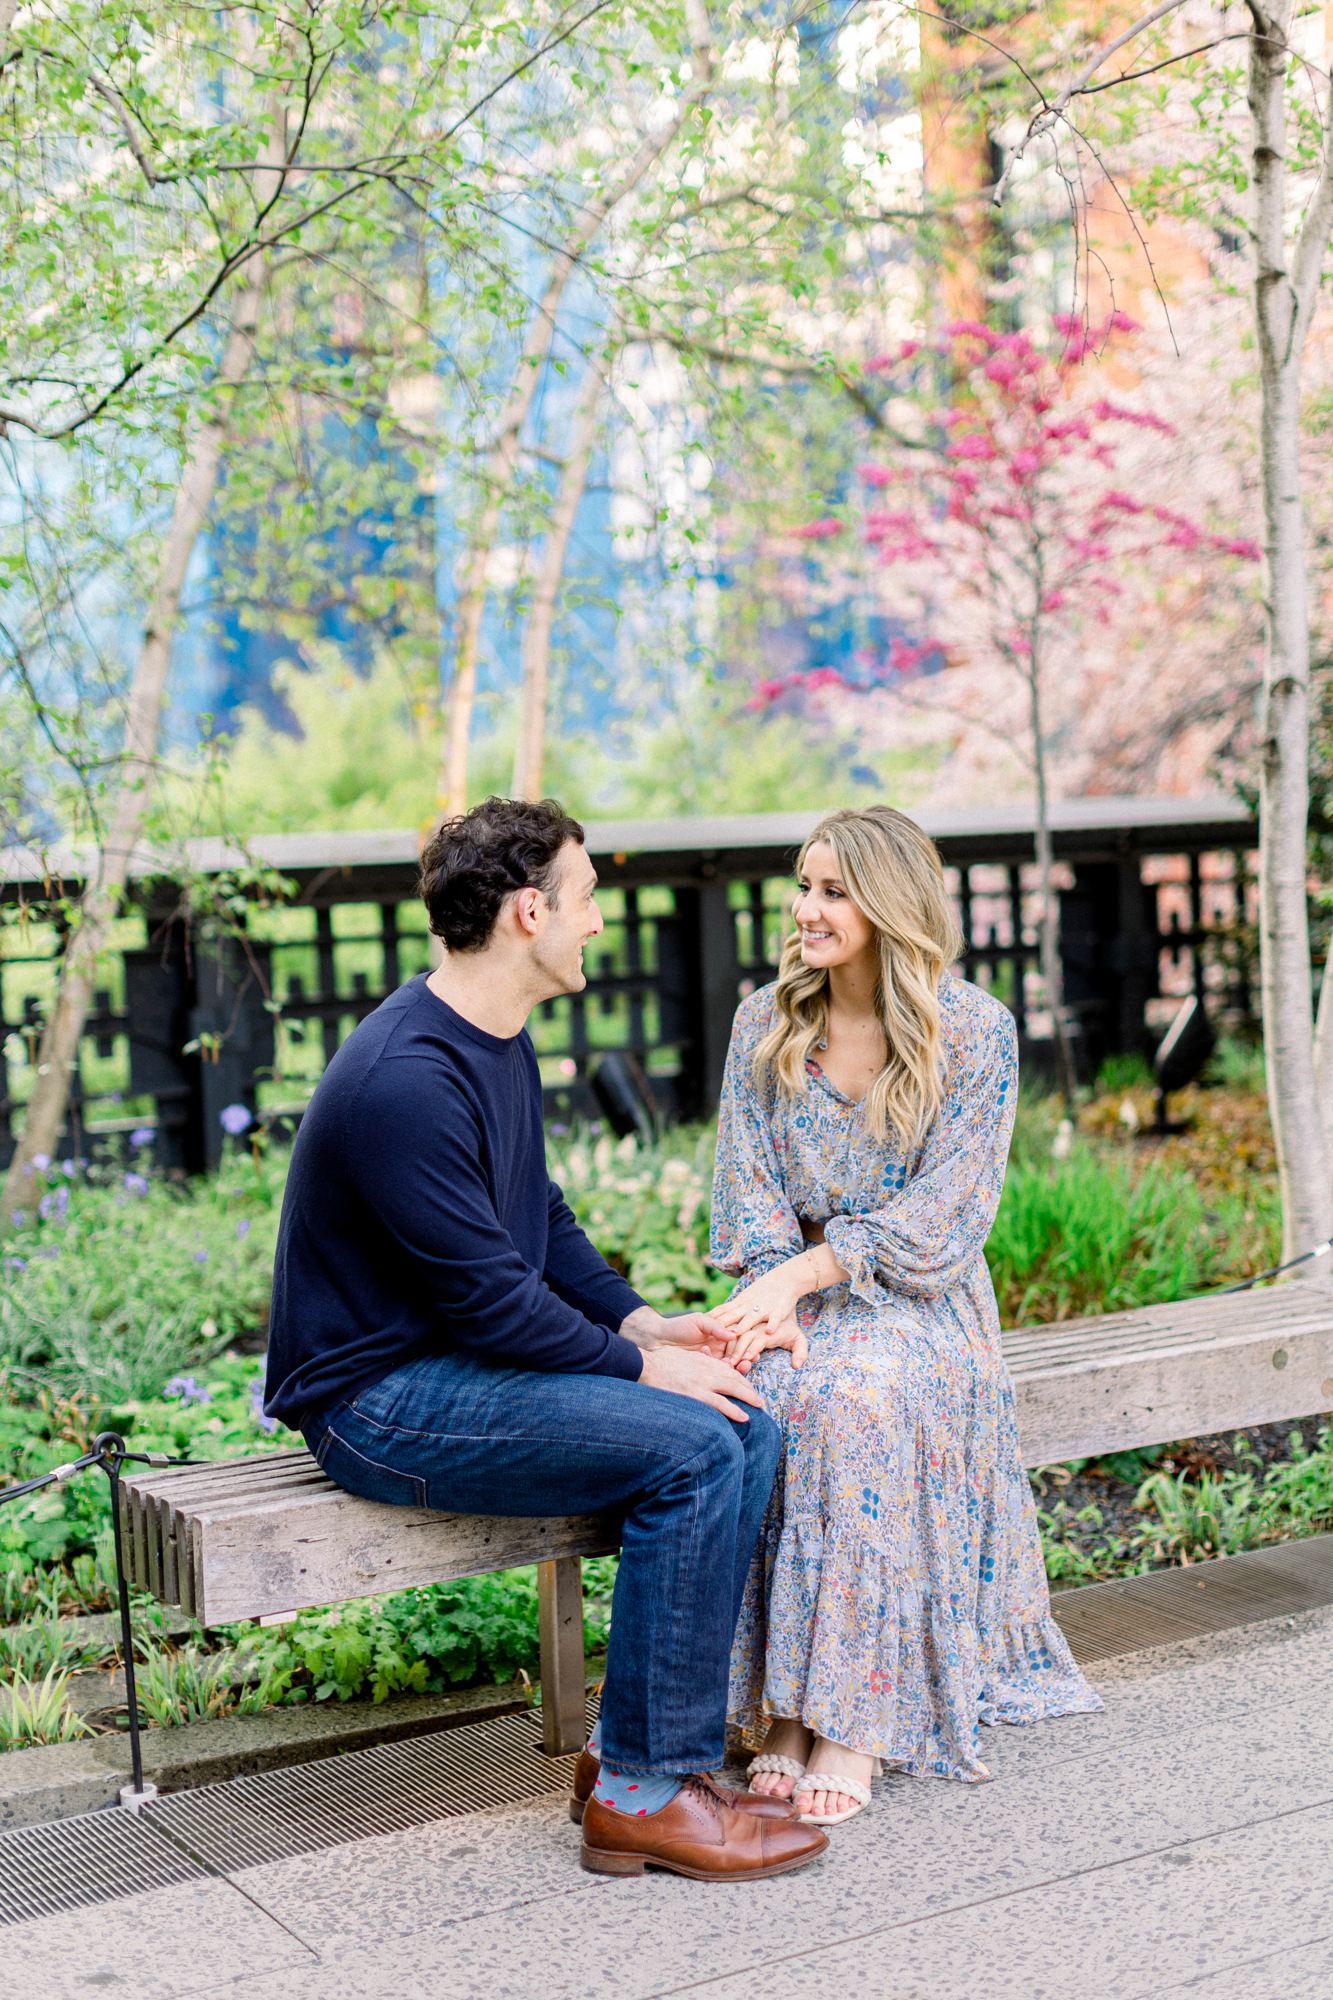 Vivid New York Engagement Photography with Spring Blossoms